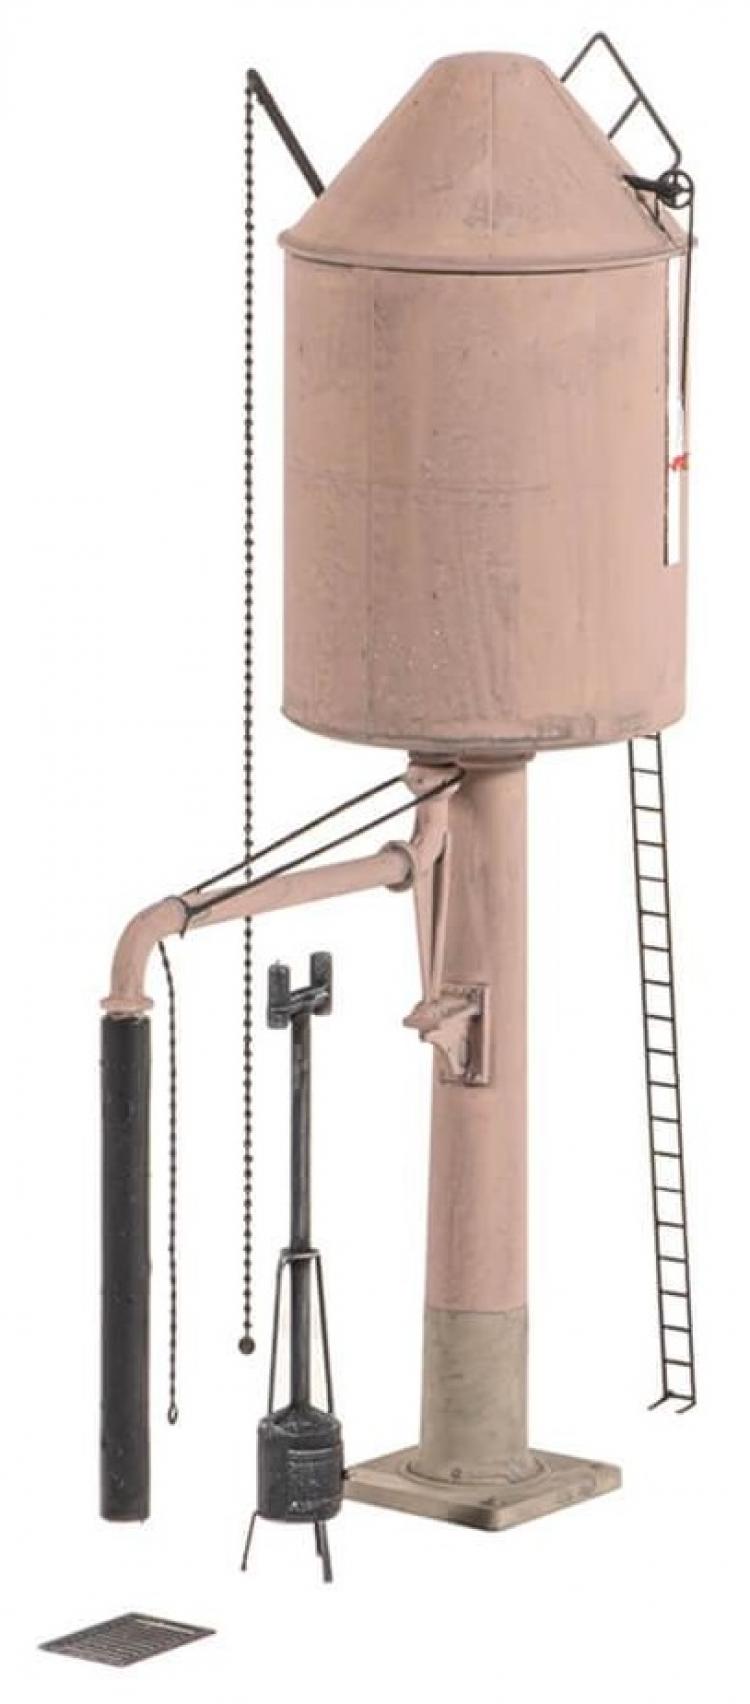 Ratio - Lineside Kit - GWR Pillar Water Tower (Conical & Flat Top) - In Stock